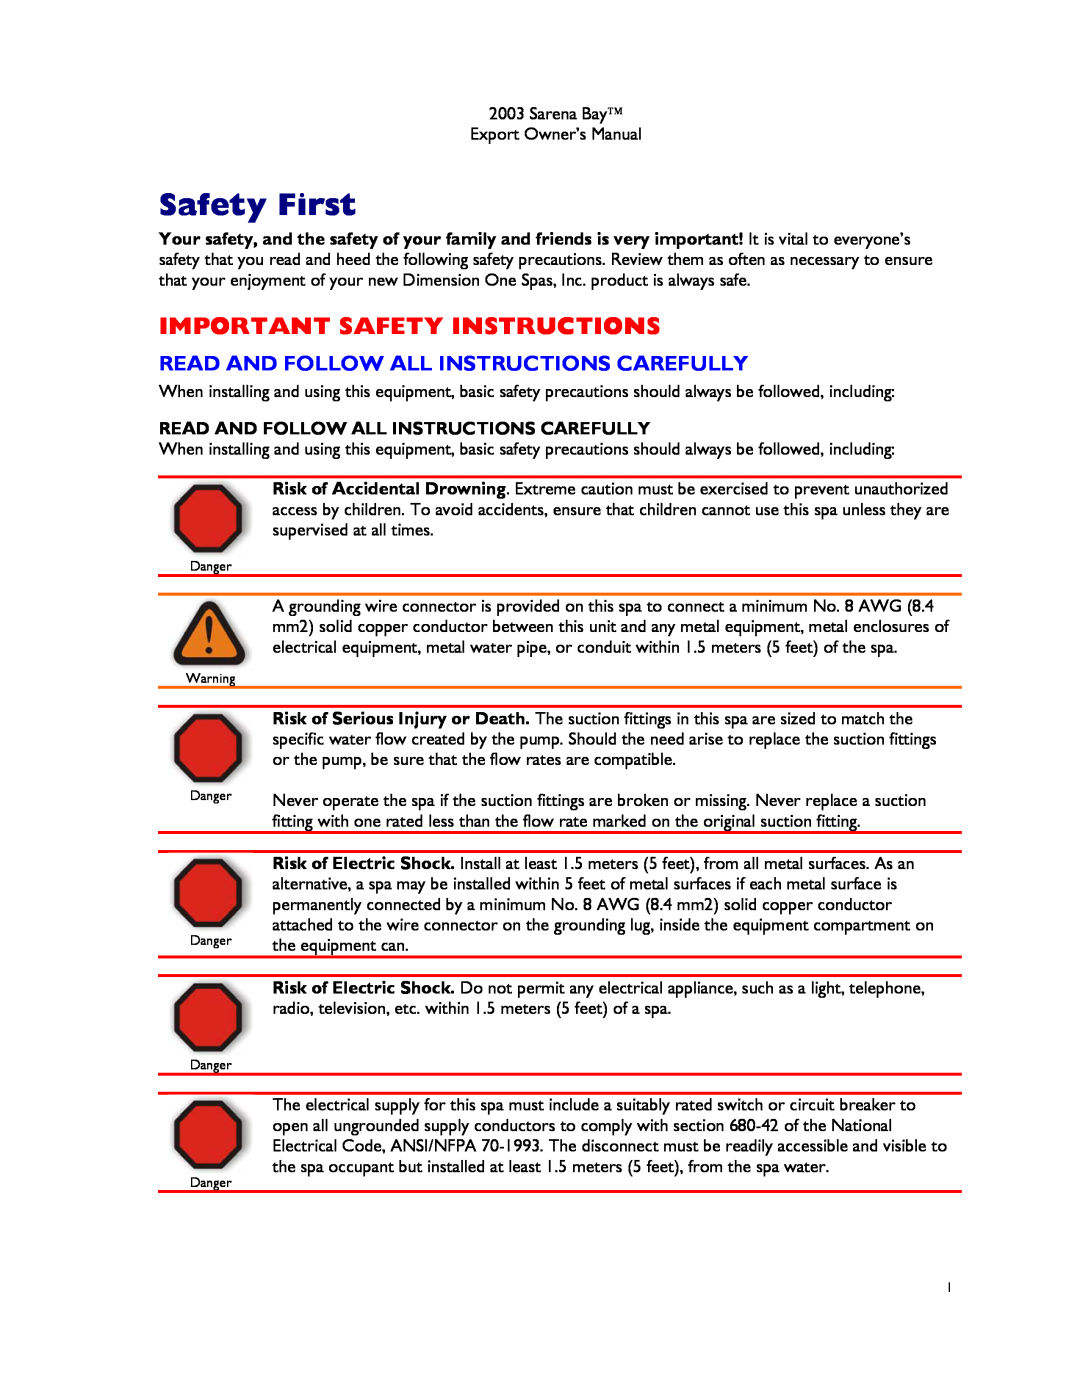 Dimension One Spas Sarena Bay Safety First, Important Safety Instructions, Read And Follow All Instructions Carefully 